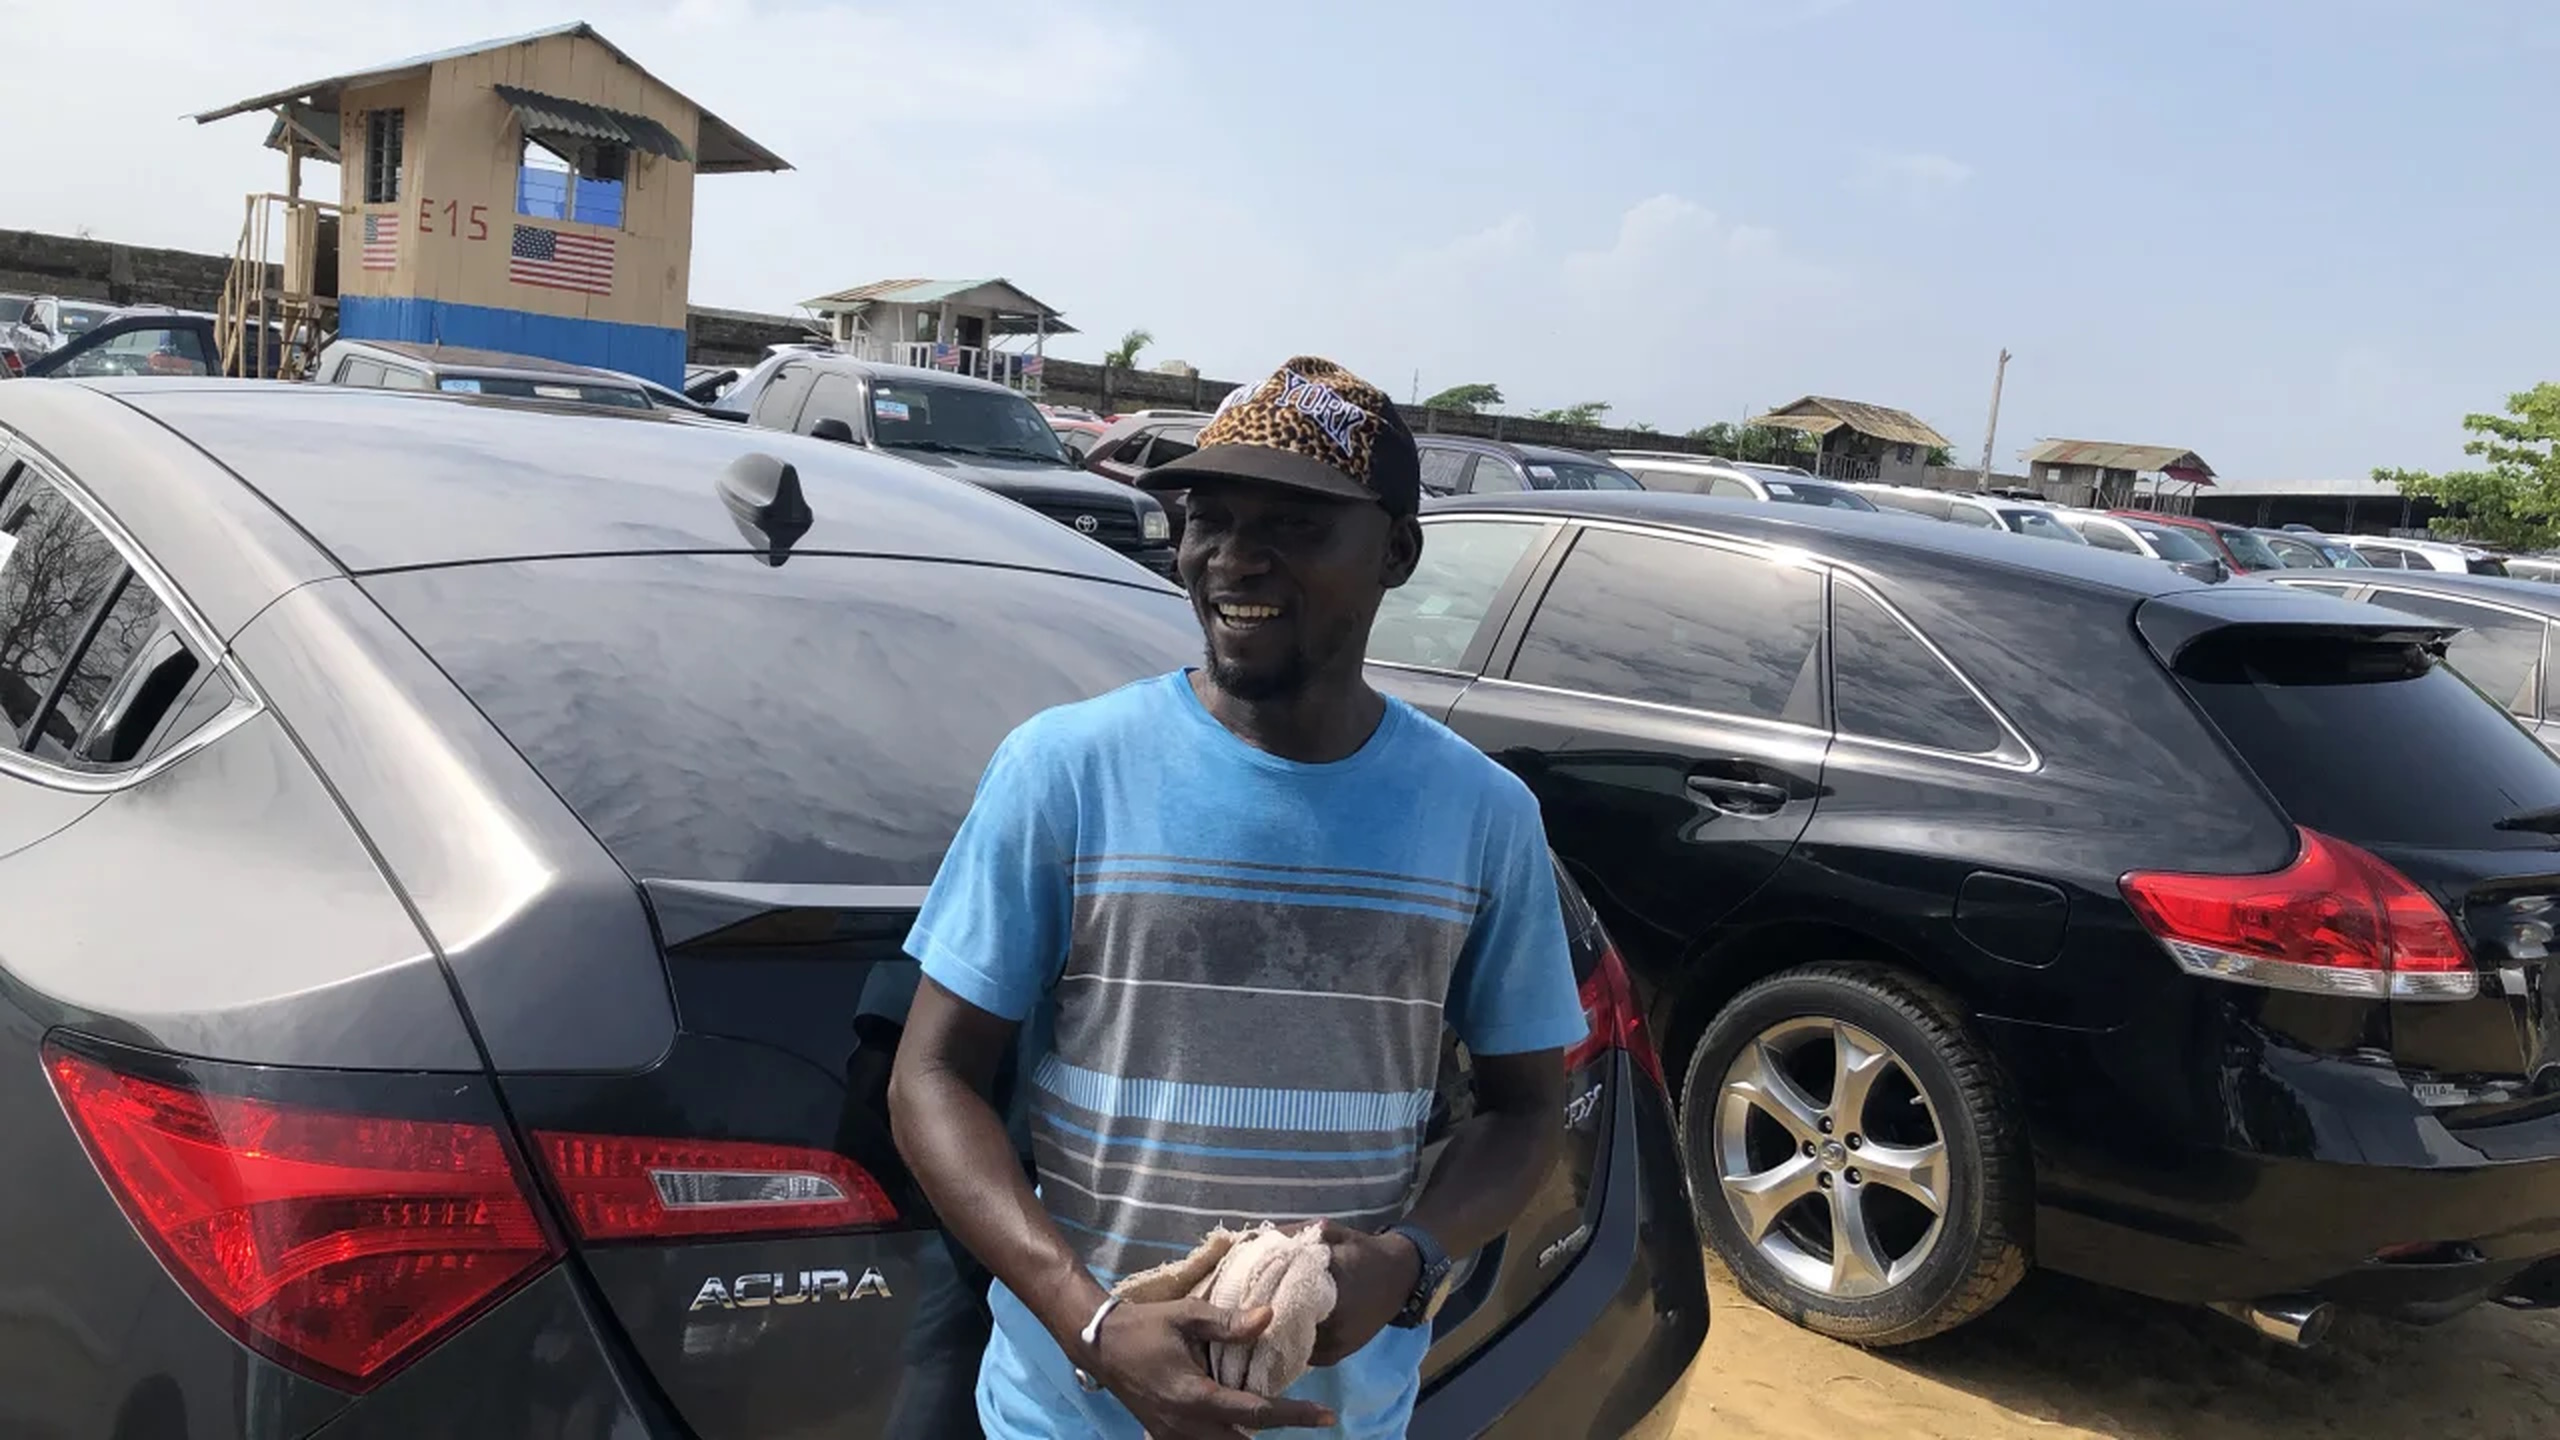 Used cars from wealthy countries such as Japan, South Korea, European countries, and the US are lined up in the Fifa Park car lot in Cotonou, Benin. Photo: Nimi Princewill / CNN